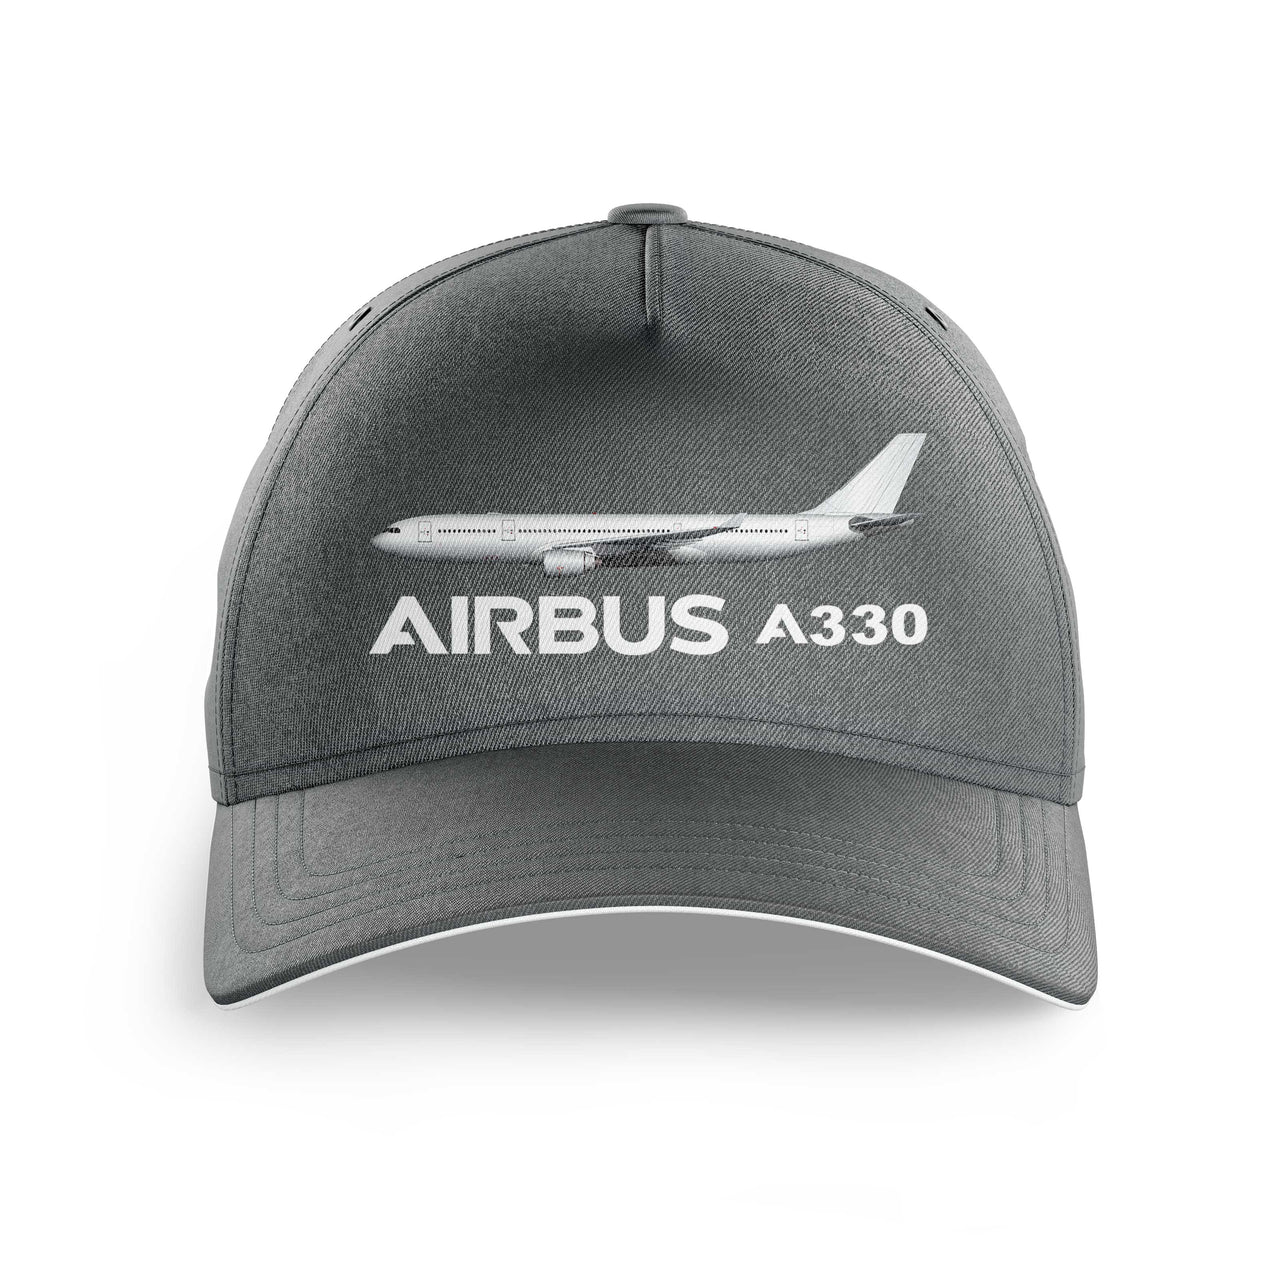 The Airbus A330 Printed Hats